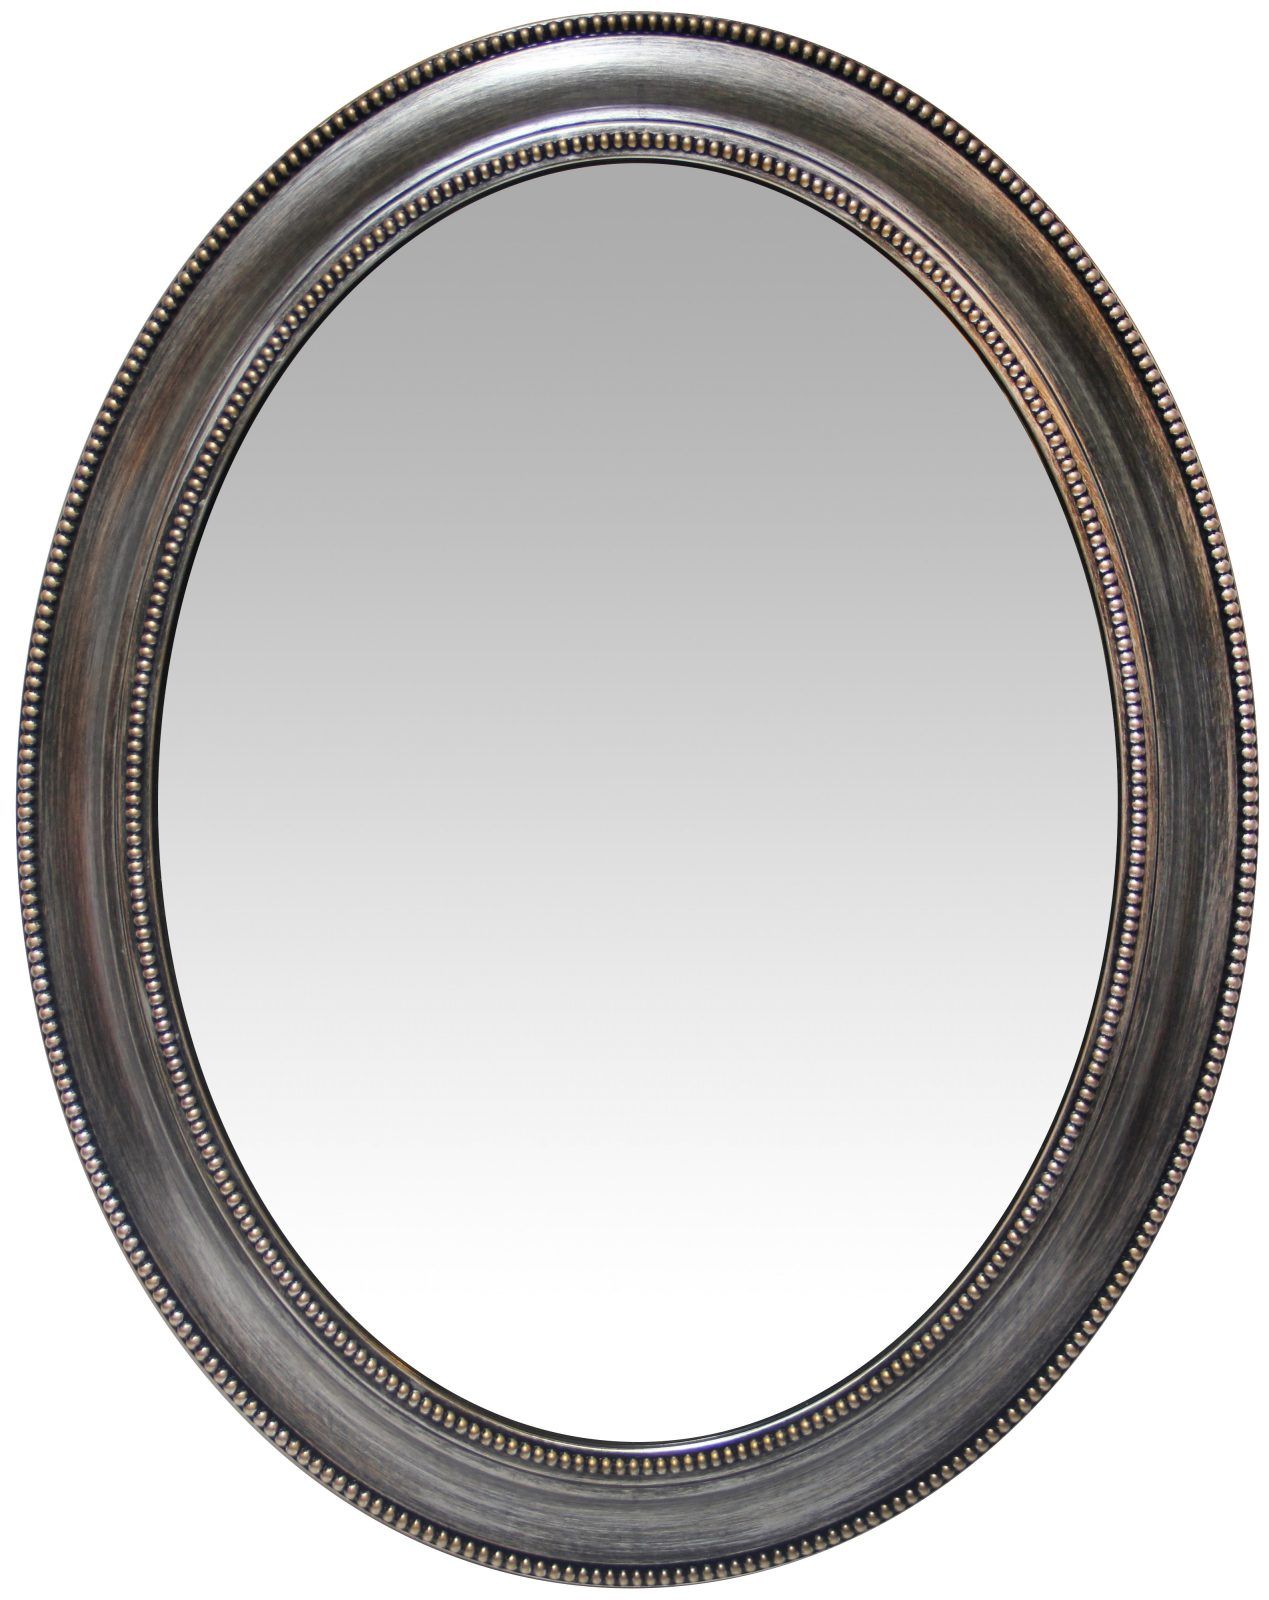 30 Inch Sonore Antique Silver Oval Wall Mirror| Clockroom Within Antique Silver Round Wall Mirrors (Photo 15 of 15)